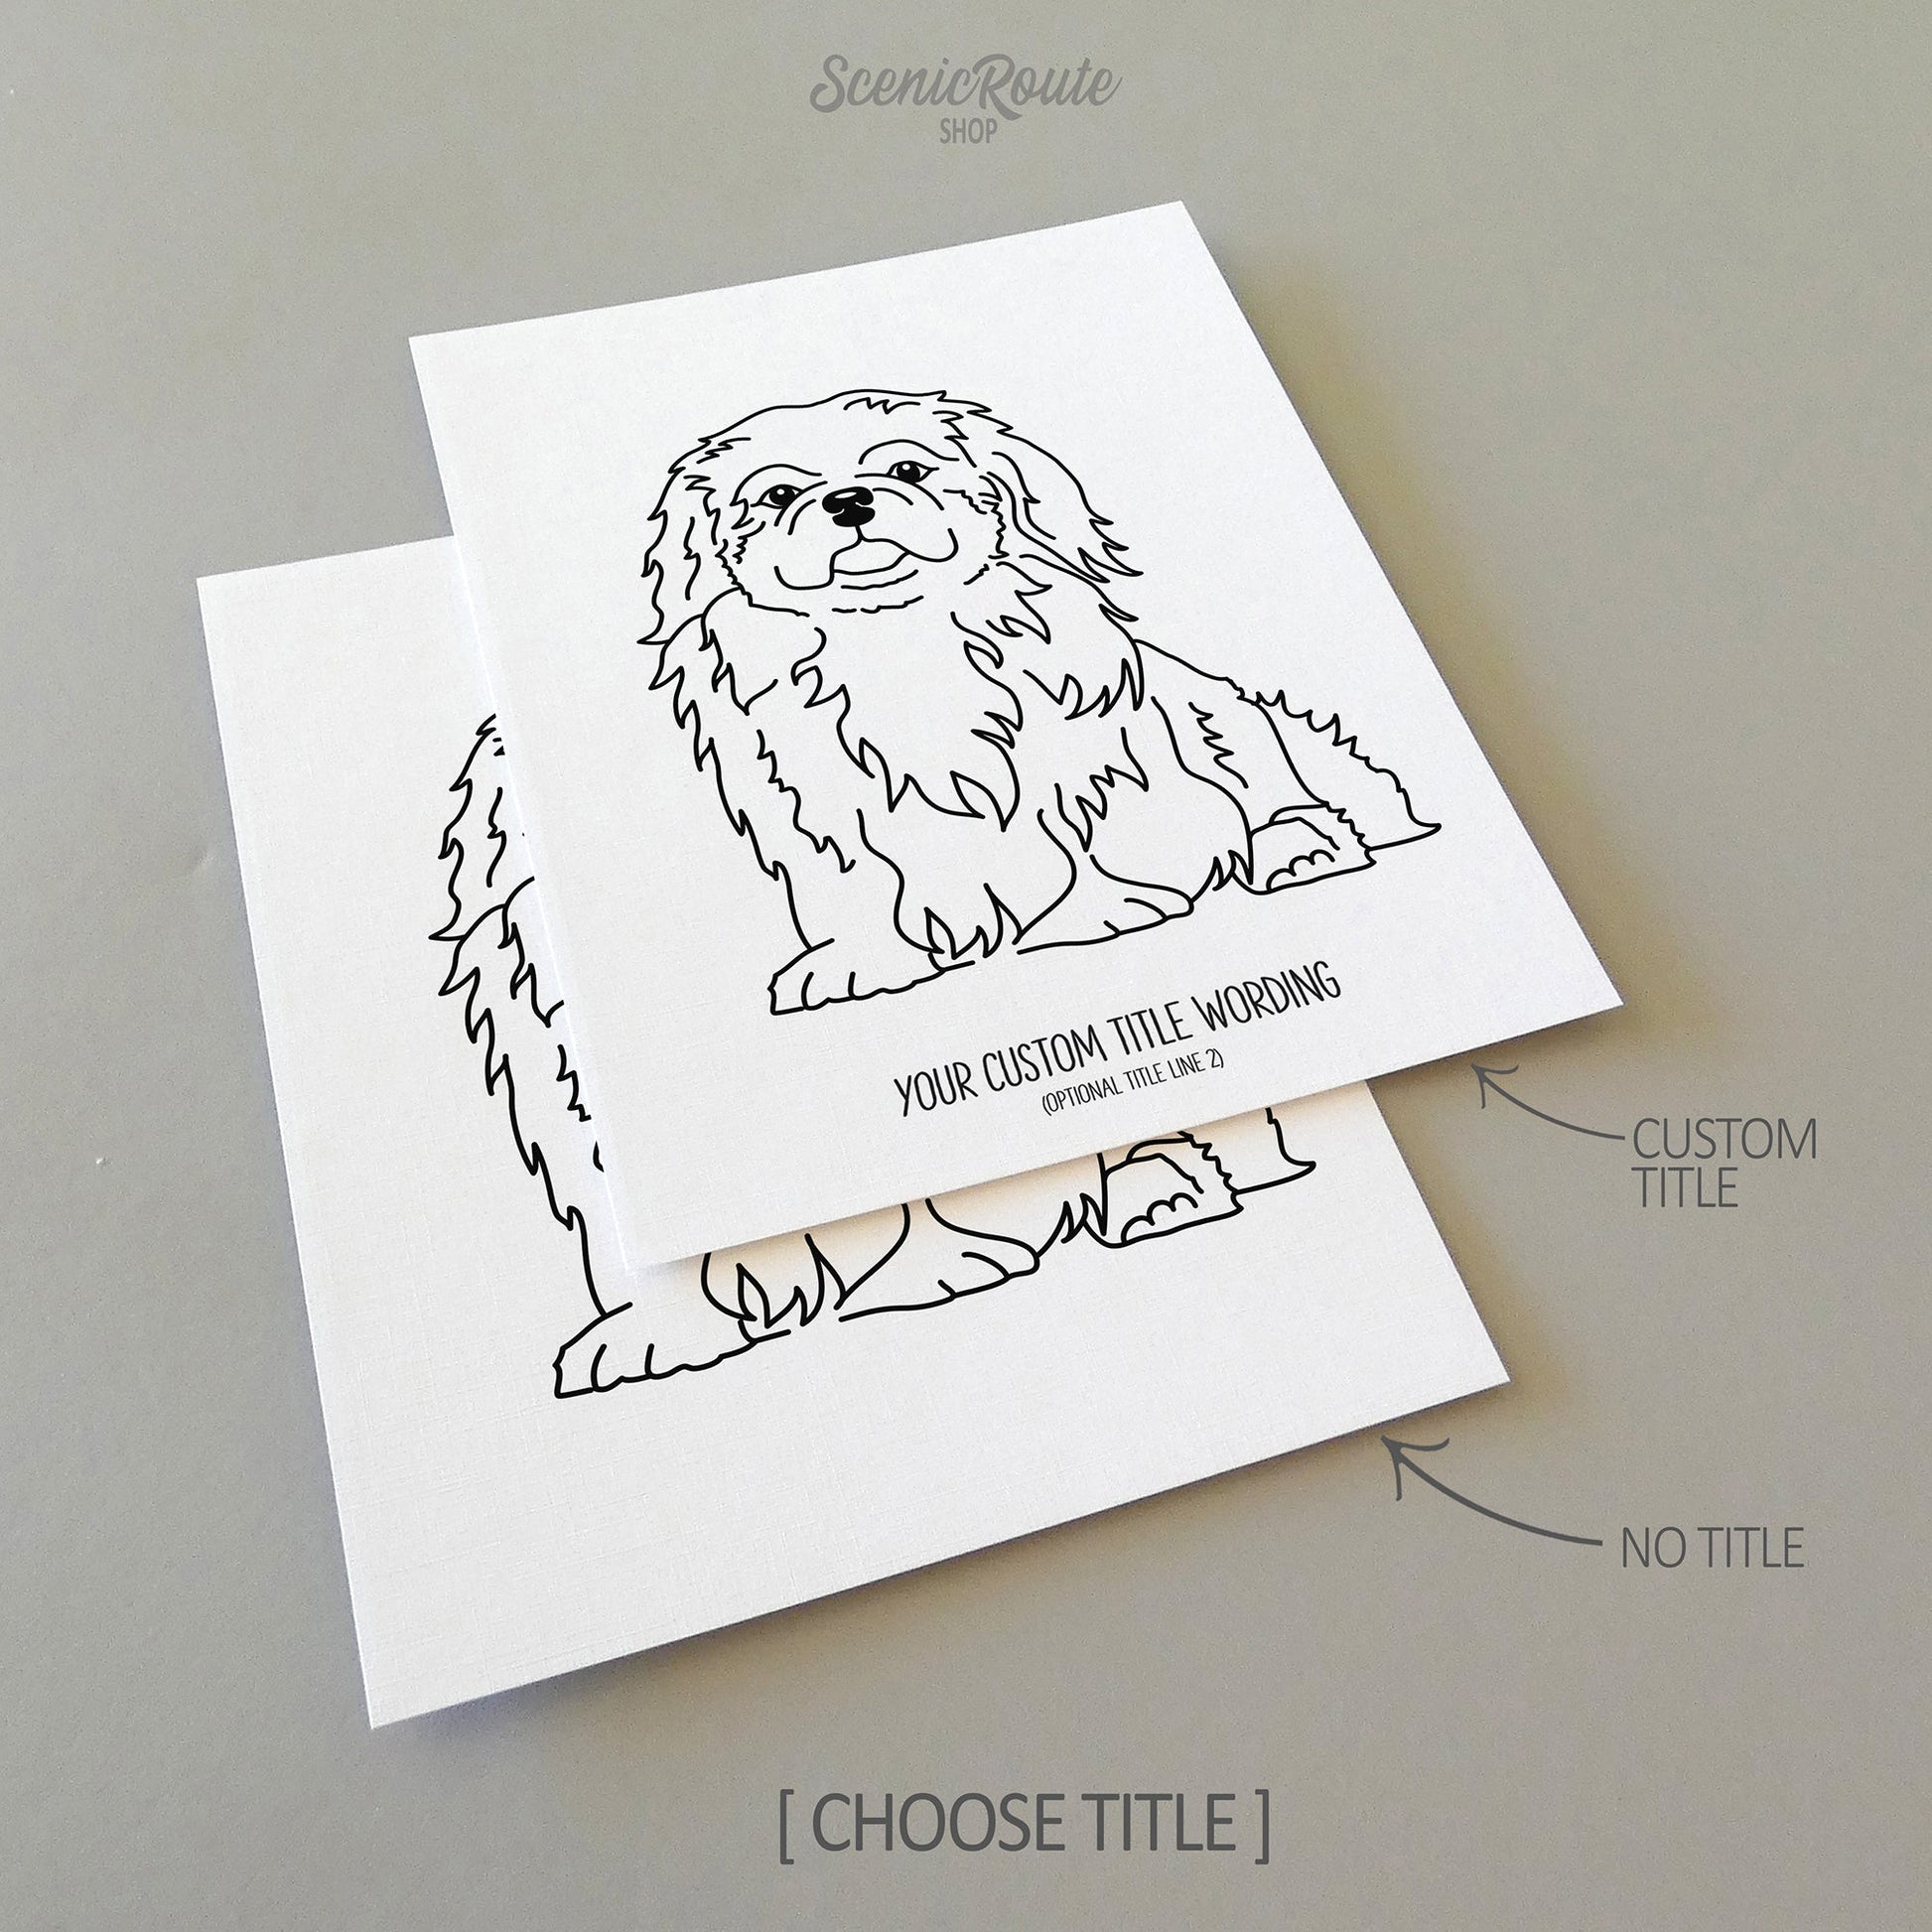 Two line art drawings of a Pekingese dog on white linen paper with a gray background.  The pieces are shown with “No Title” and “Custom Title” options for the available art print options.